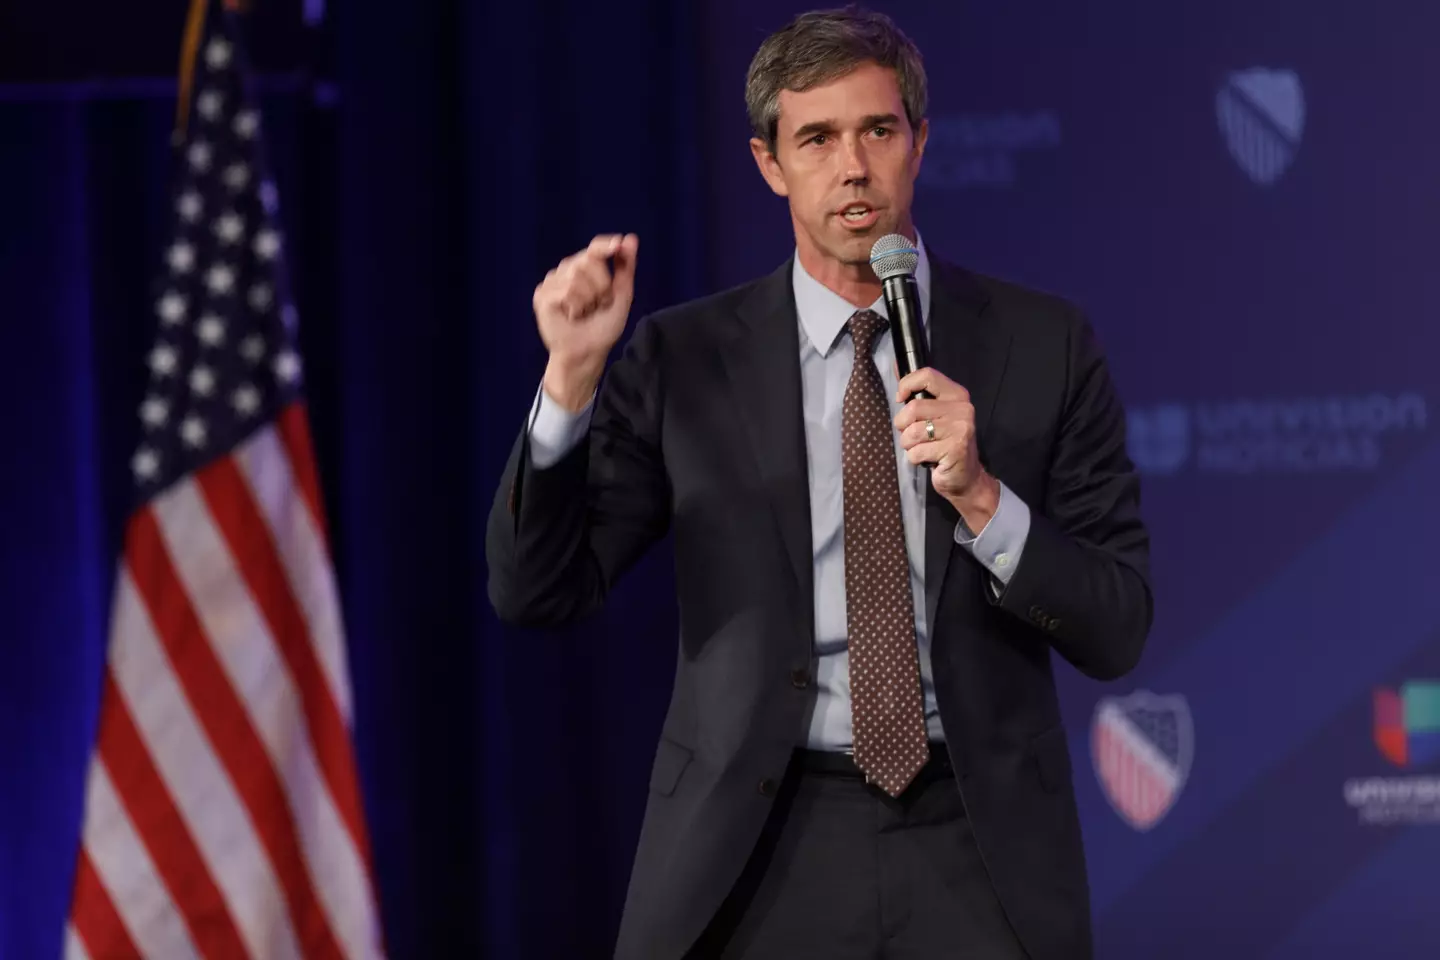 Beto O'Rourke hit back at a man who laughed at the Uvalde school shooting.